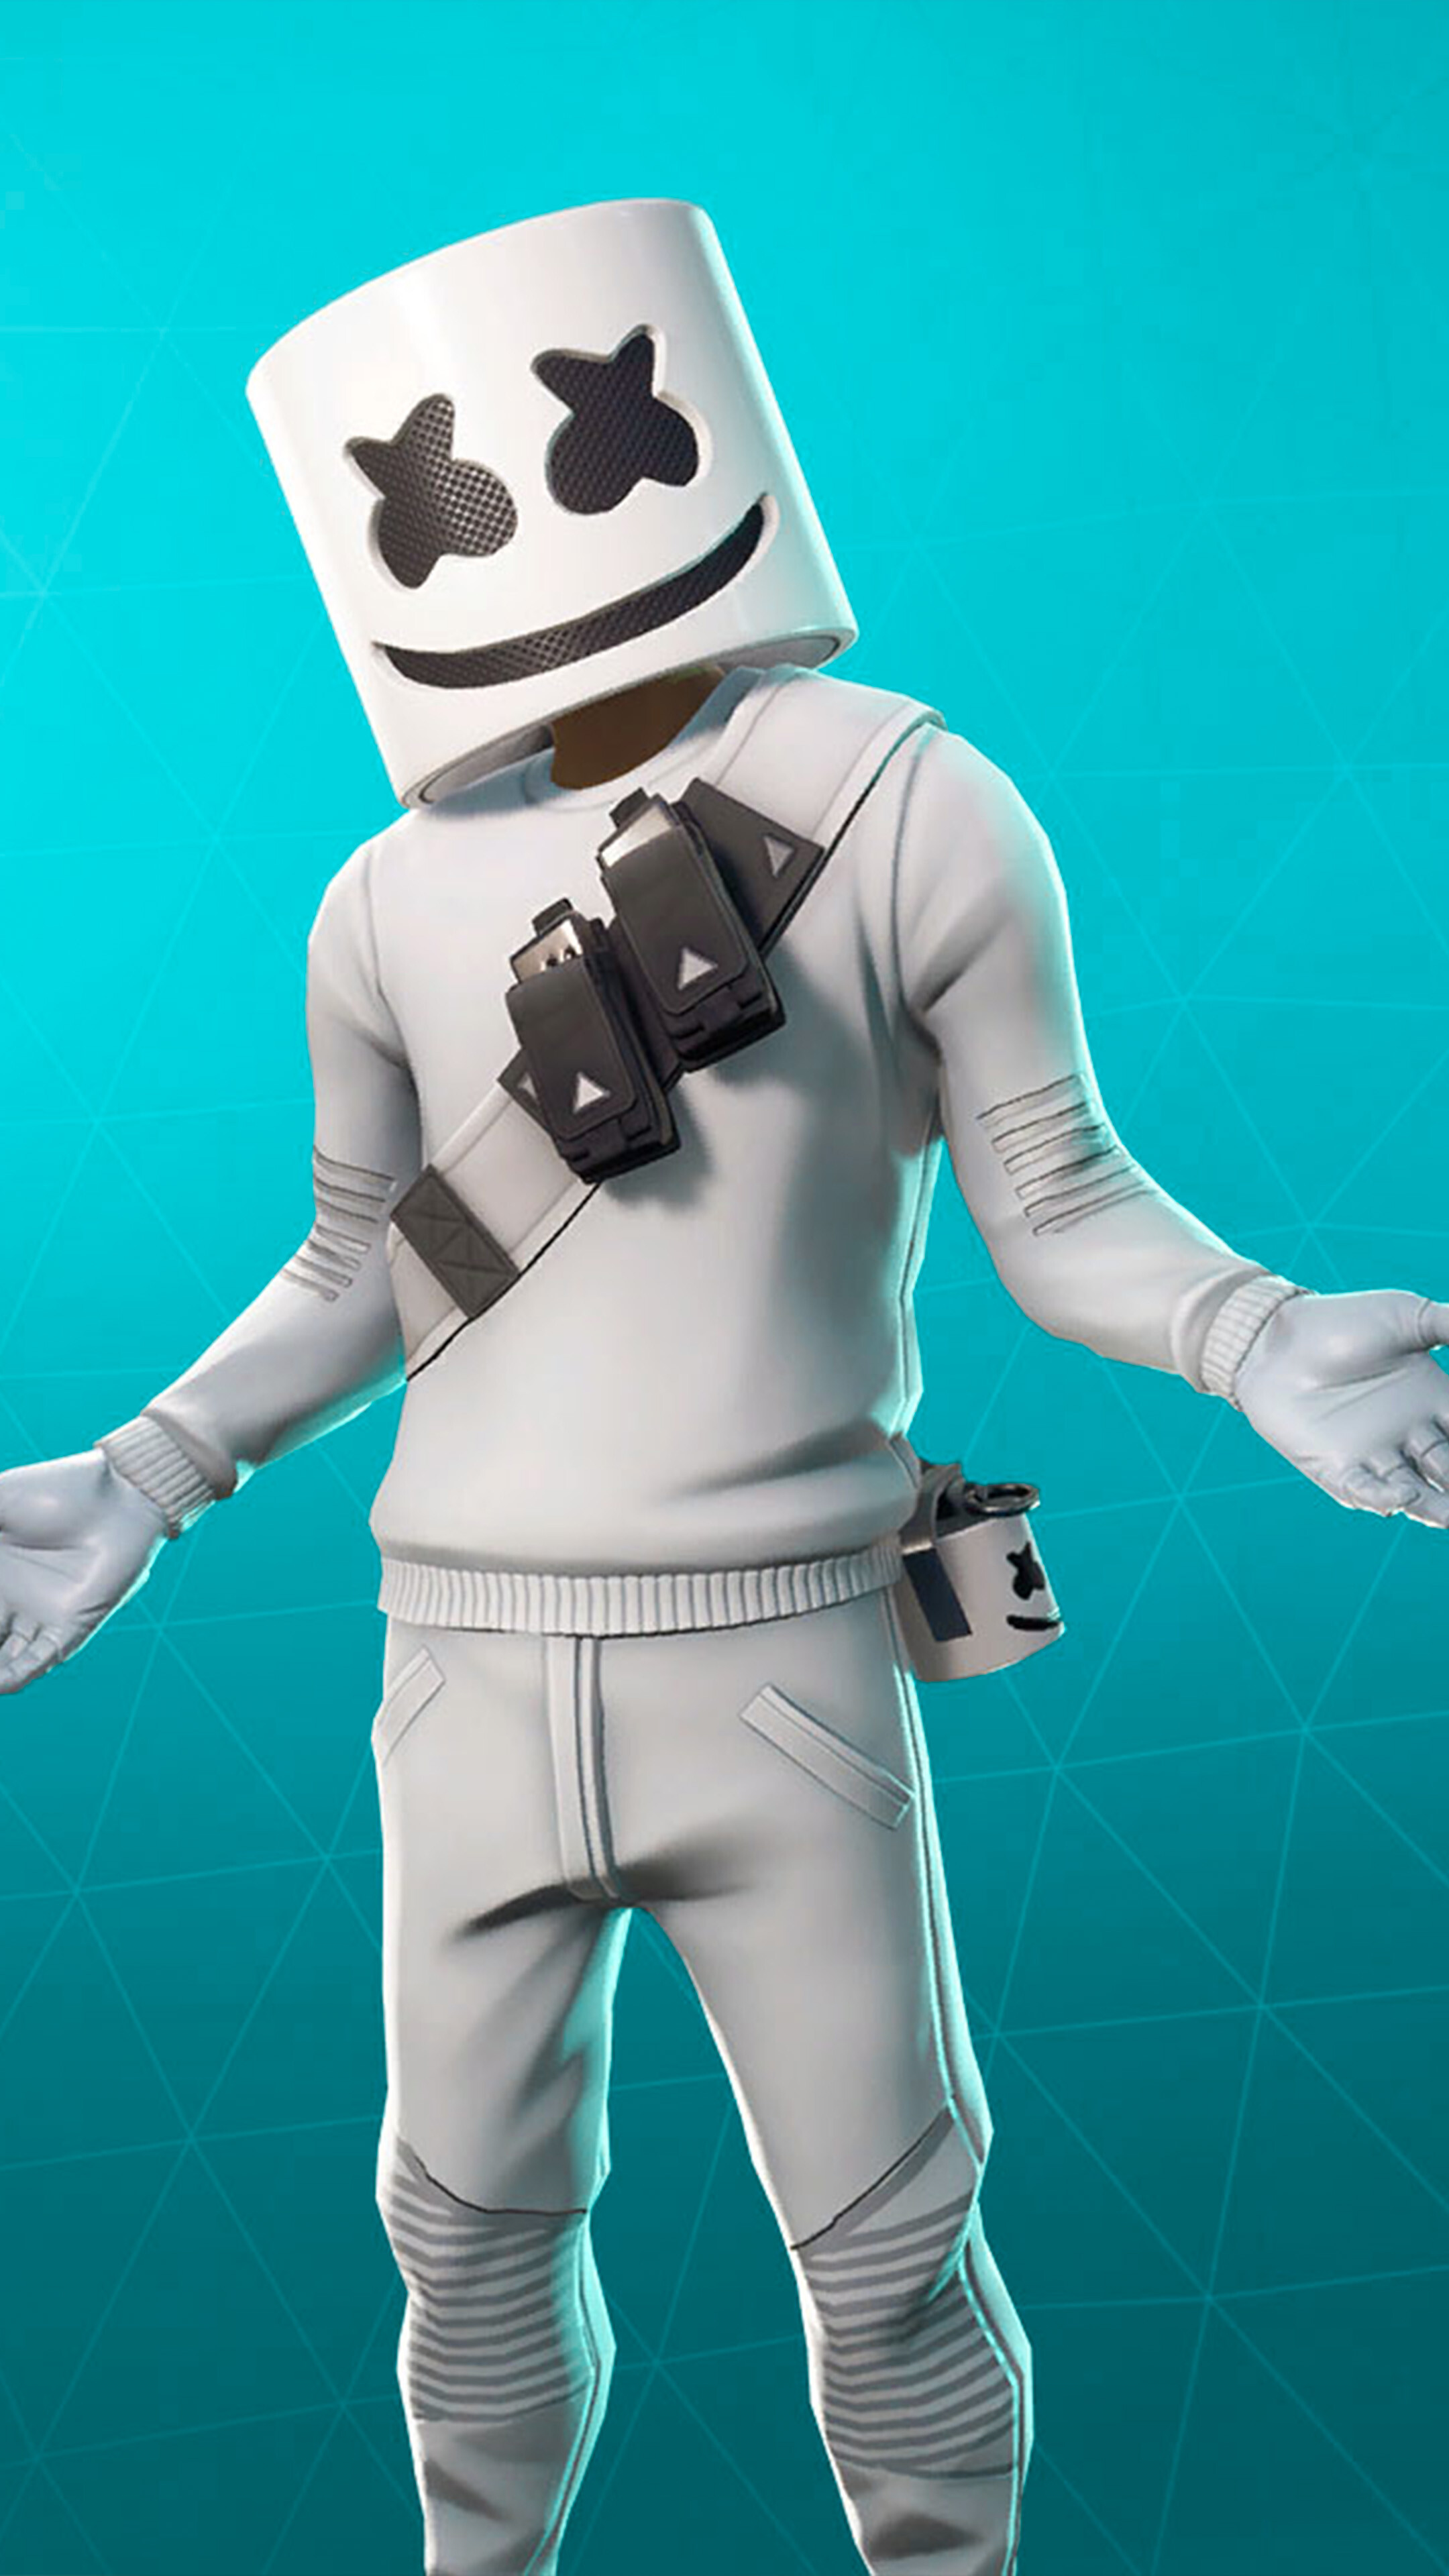 Fortnite: A key component – the ability to purchase in-game features such as outfits and other equipment, Marshmello Skin. 2160x3840 4K Wallpaper.